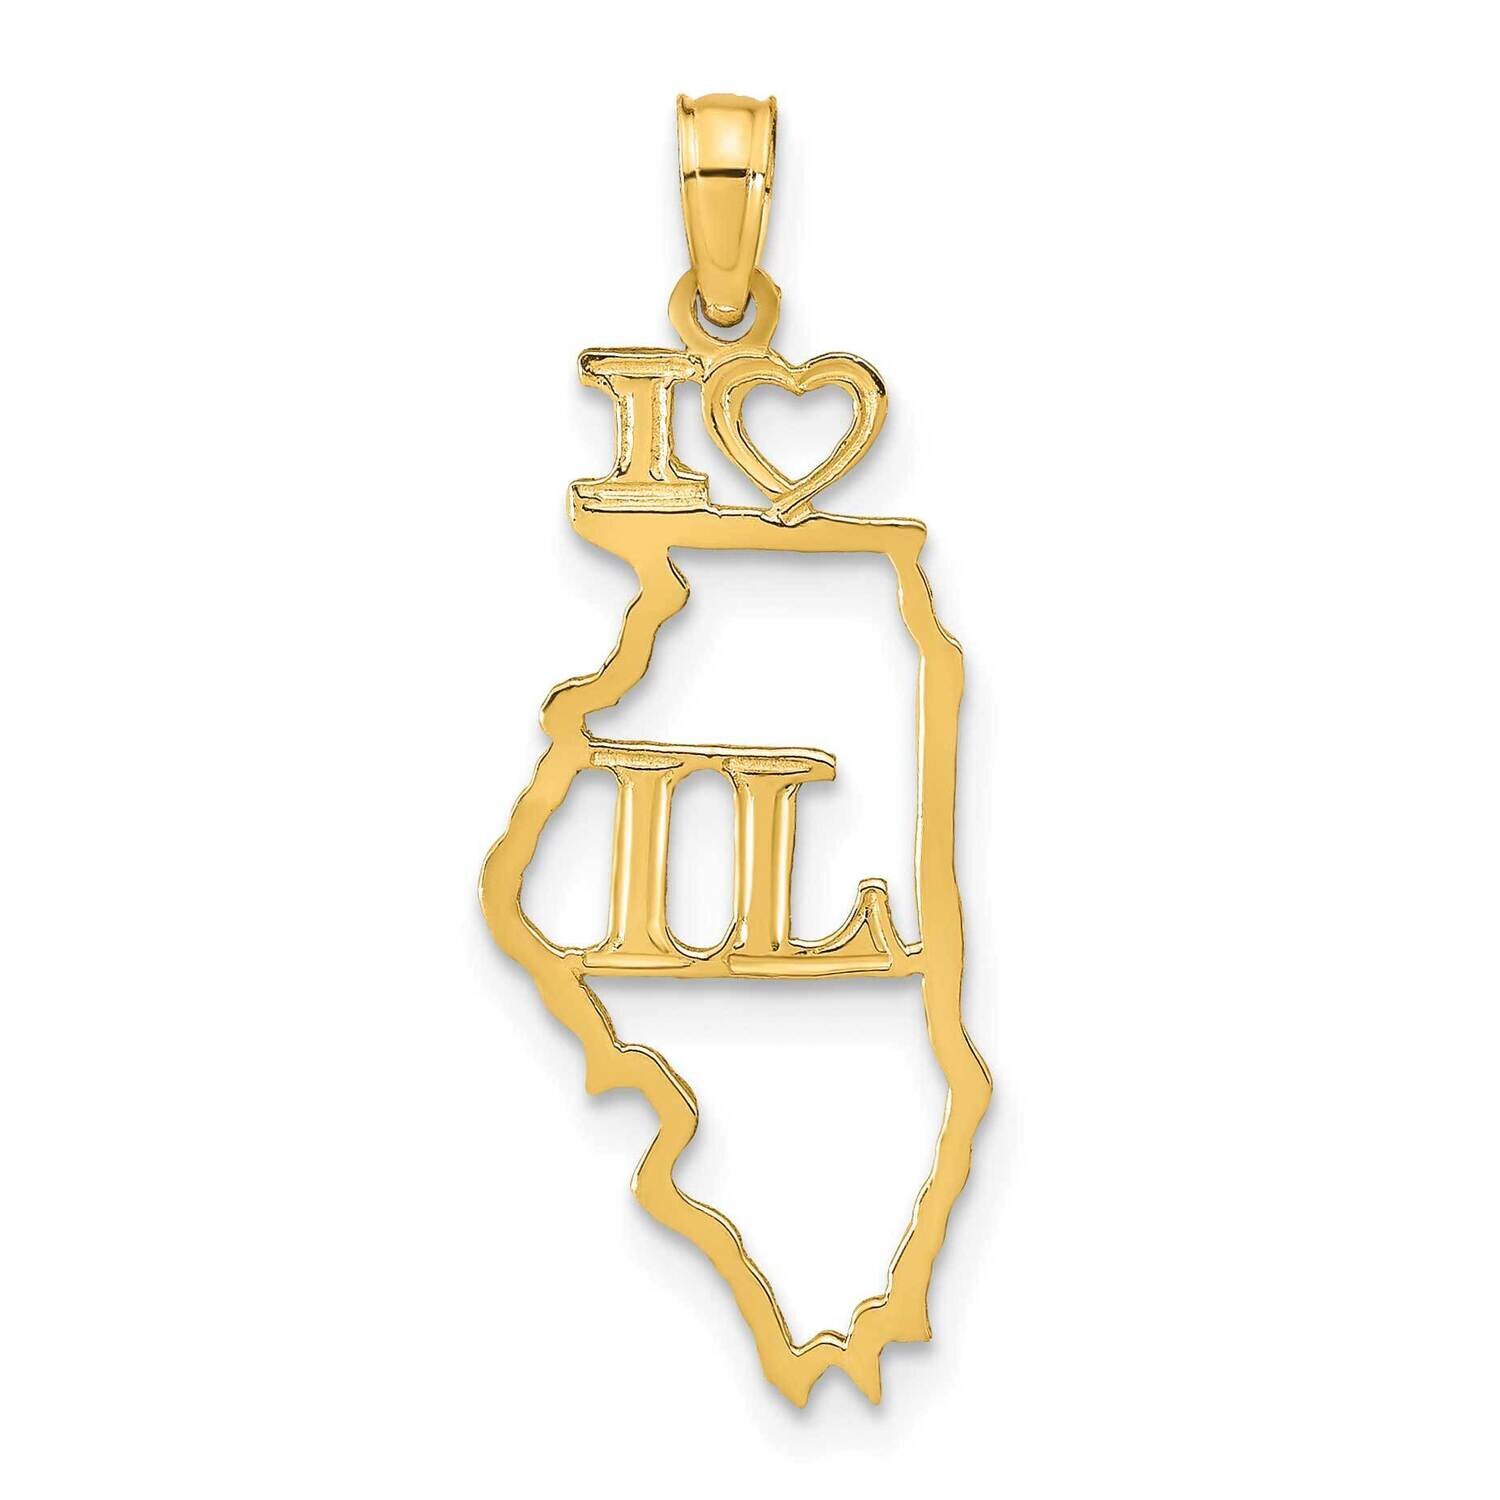 Illinois State Pendant 14k Gold Solid D1161